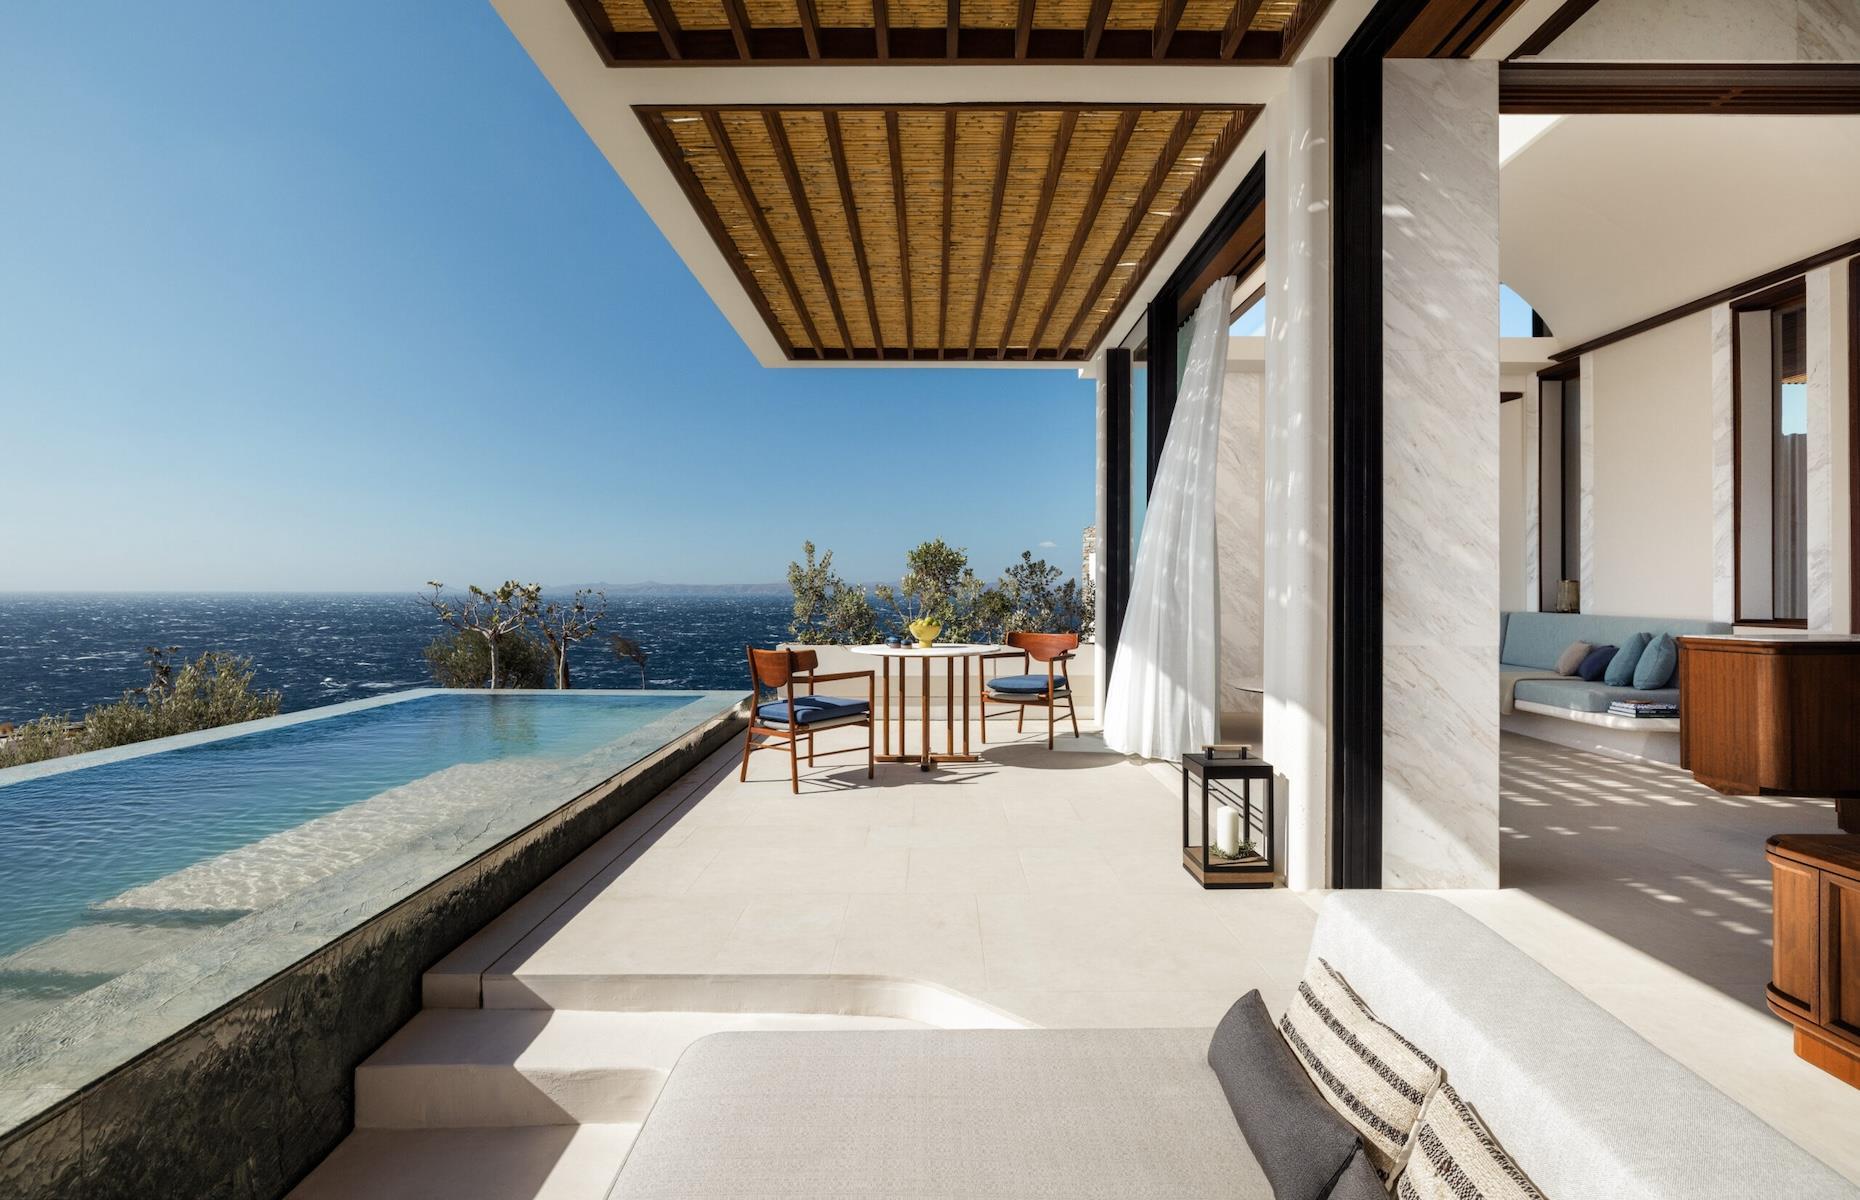 <p>We're only a short way into the year so far, but it already looks set to be a bumper one for blow-the-budget hotel openings, with some seriously seductive properties already opening around the world – and many more to come. From idyllic island retreats and high-design hideaways to ultra-glam boutique boltholes and palatial residences, here are some of the hot new places to stay in for luxury lovers.</p>  <p><strong>Click through the gallery to discover this year's most exciting luxury hotel openings...</strong></p>